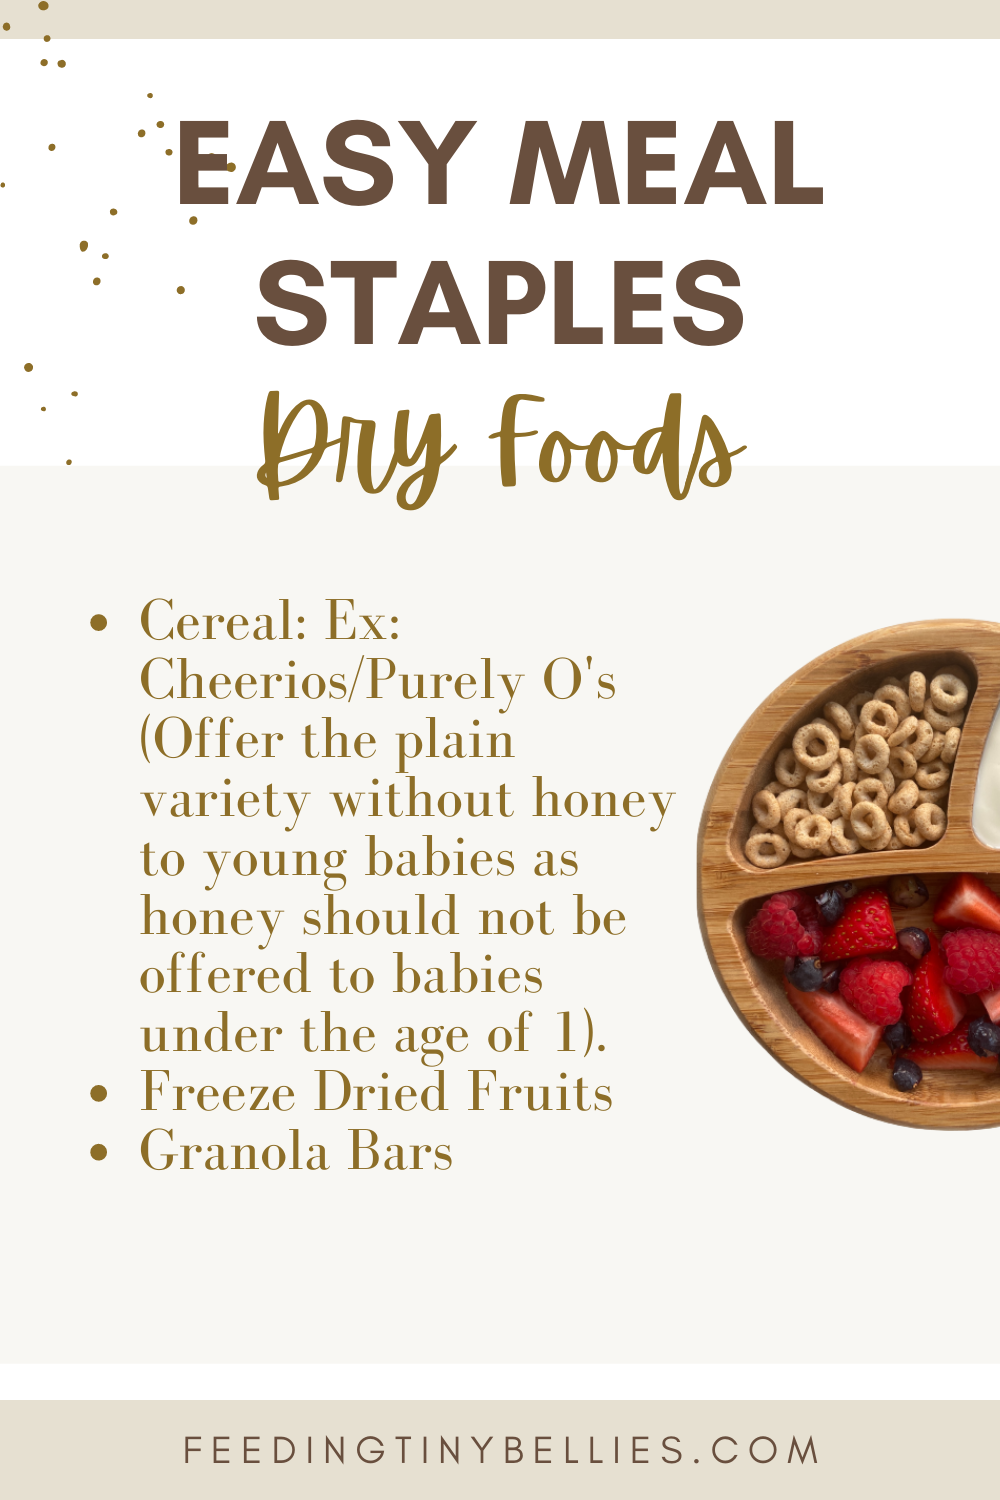 Easy Toddler Meal Staples - Dry Foods